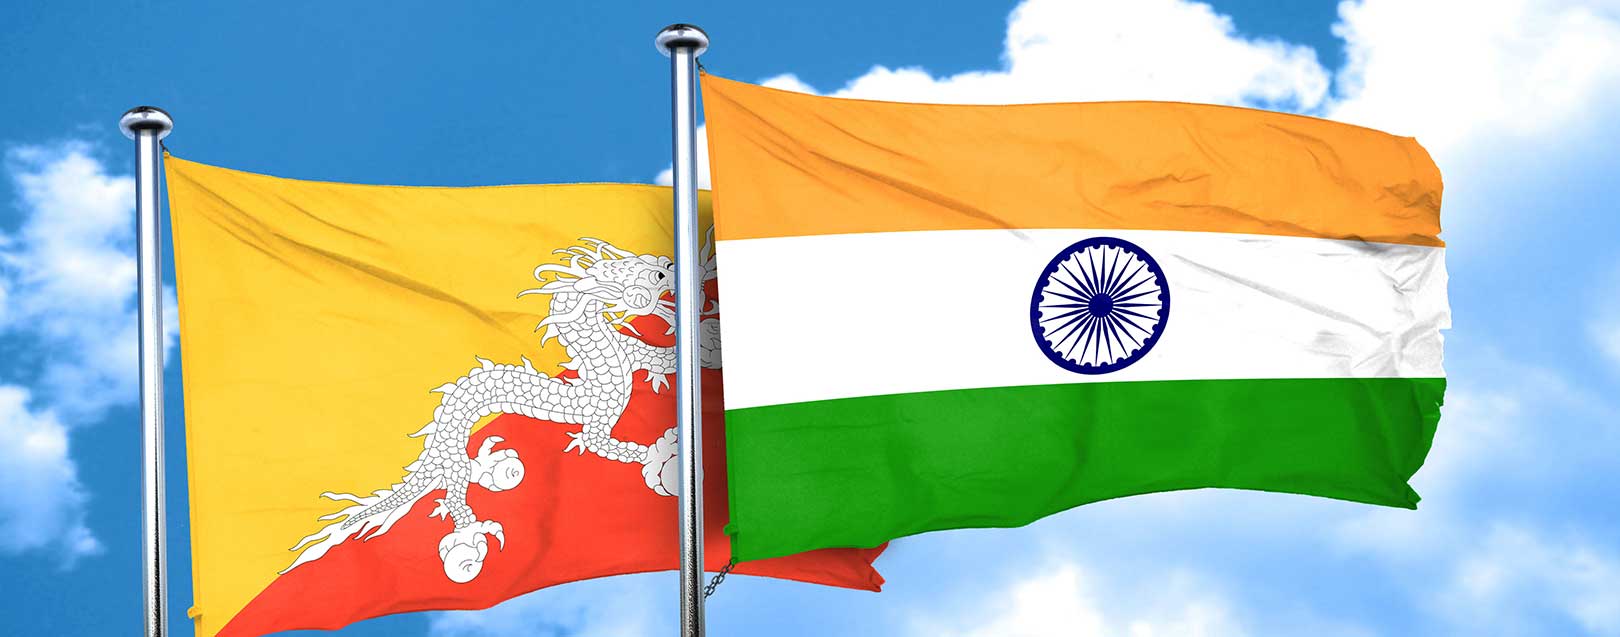 Cabinet clears new agreement on trade, commerce with Bhutan